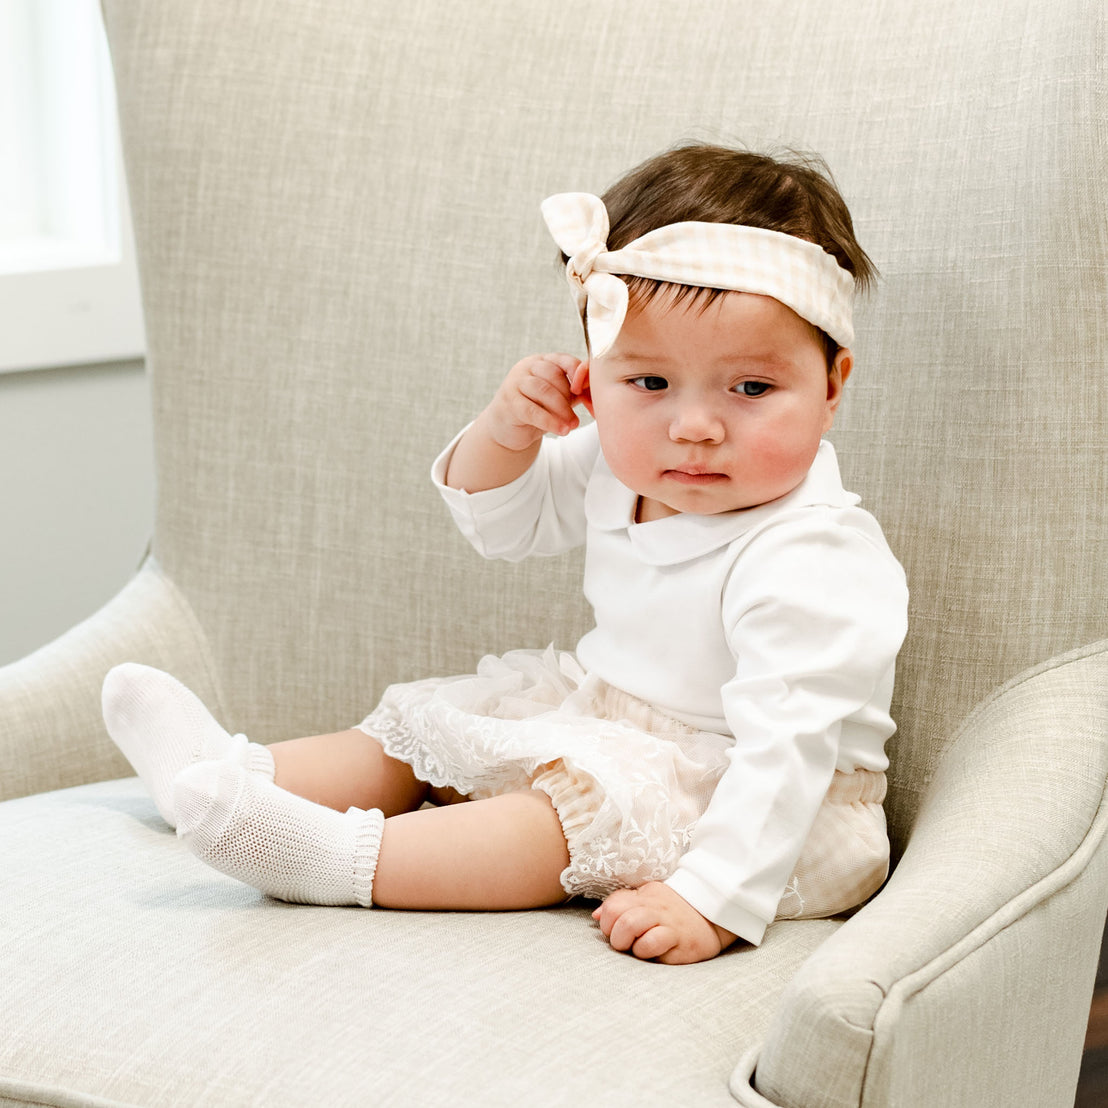 A baby girl wearing the Isla Bubble Skirt Set sits on a beige chair, looking thoughtful while touching her matching Isla Tie Headband.